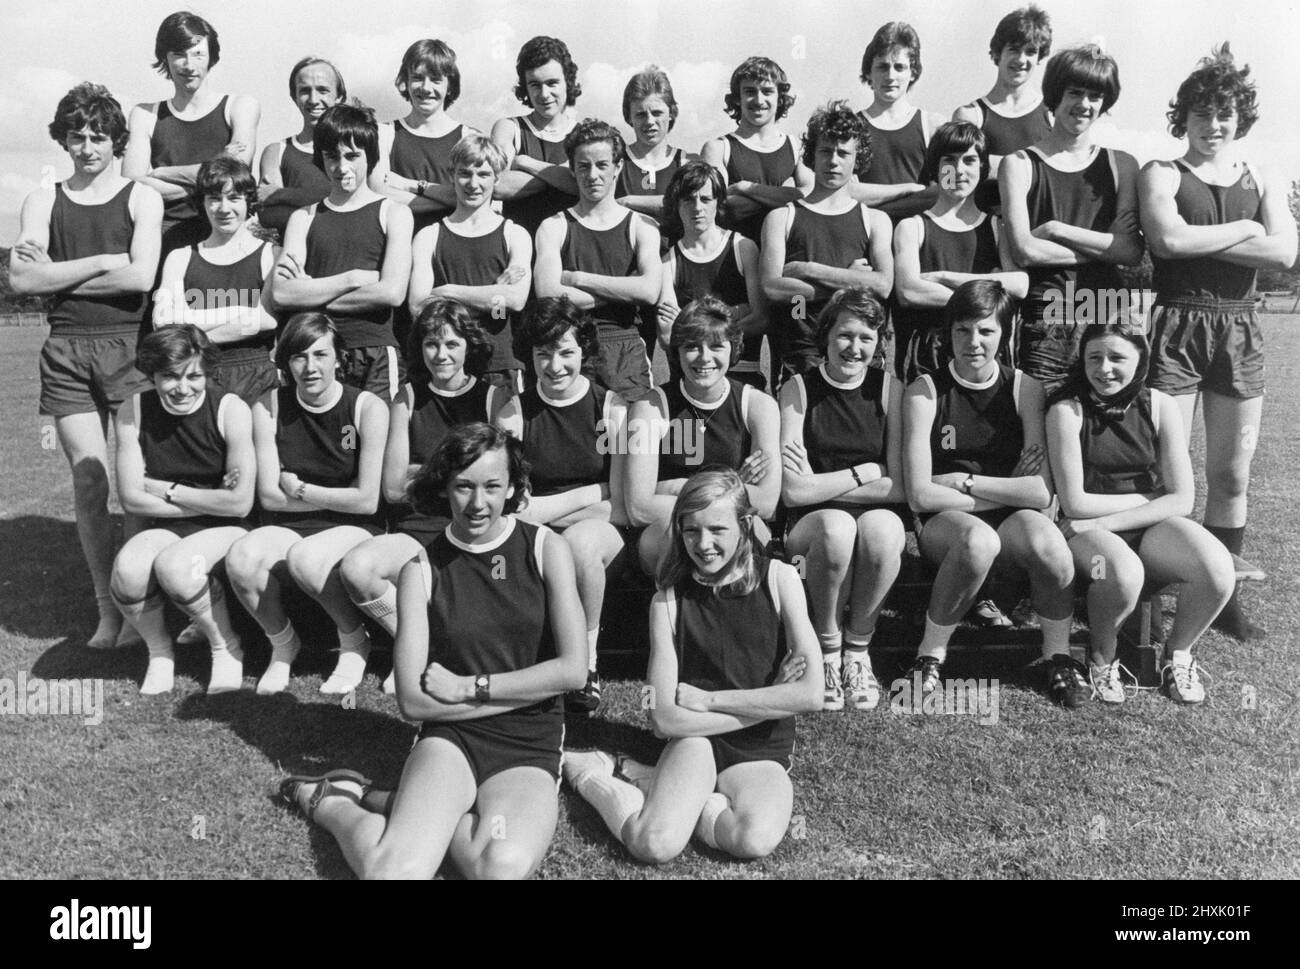 Members of Cleveland Schools Athletics Association who will be competing in the English Schools National Track and Field Championships (Hendon 8th and 9th July) pictured during break in training at Marton Sixth Form College, 30th June 1977. Back Row L-R. John Daley, Tim Freeman, Tommy Dunne, Philip Powell, Mark Robson, Paul Porter, Andrew Lennie, Peter Dee. Middle Row L-R. Mark Preston, Paul Gardner, Ian Lidster, Brian Sutherland, Mark Robinson, Paul Hargraves, Terry Franks, Robert Phoenix, Michael Thompson, Ian Purchon.  Front Row L-R. Janine McGregor, Ann Woodall, Sandra Laws, Janet Brems, S Stock Photo